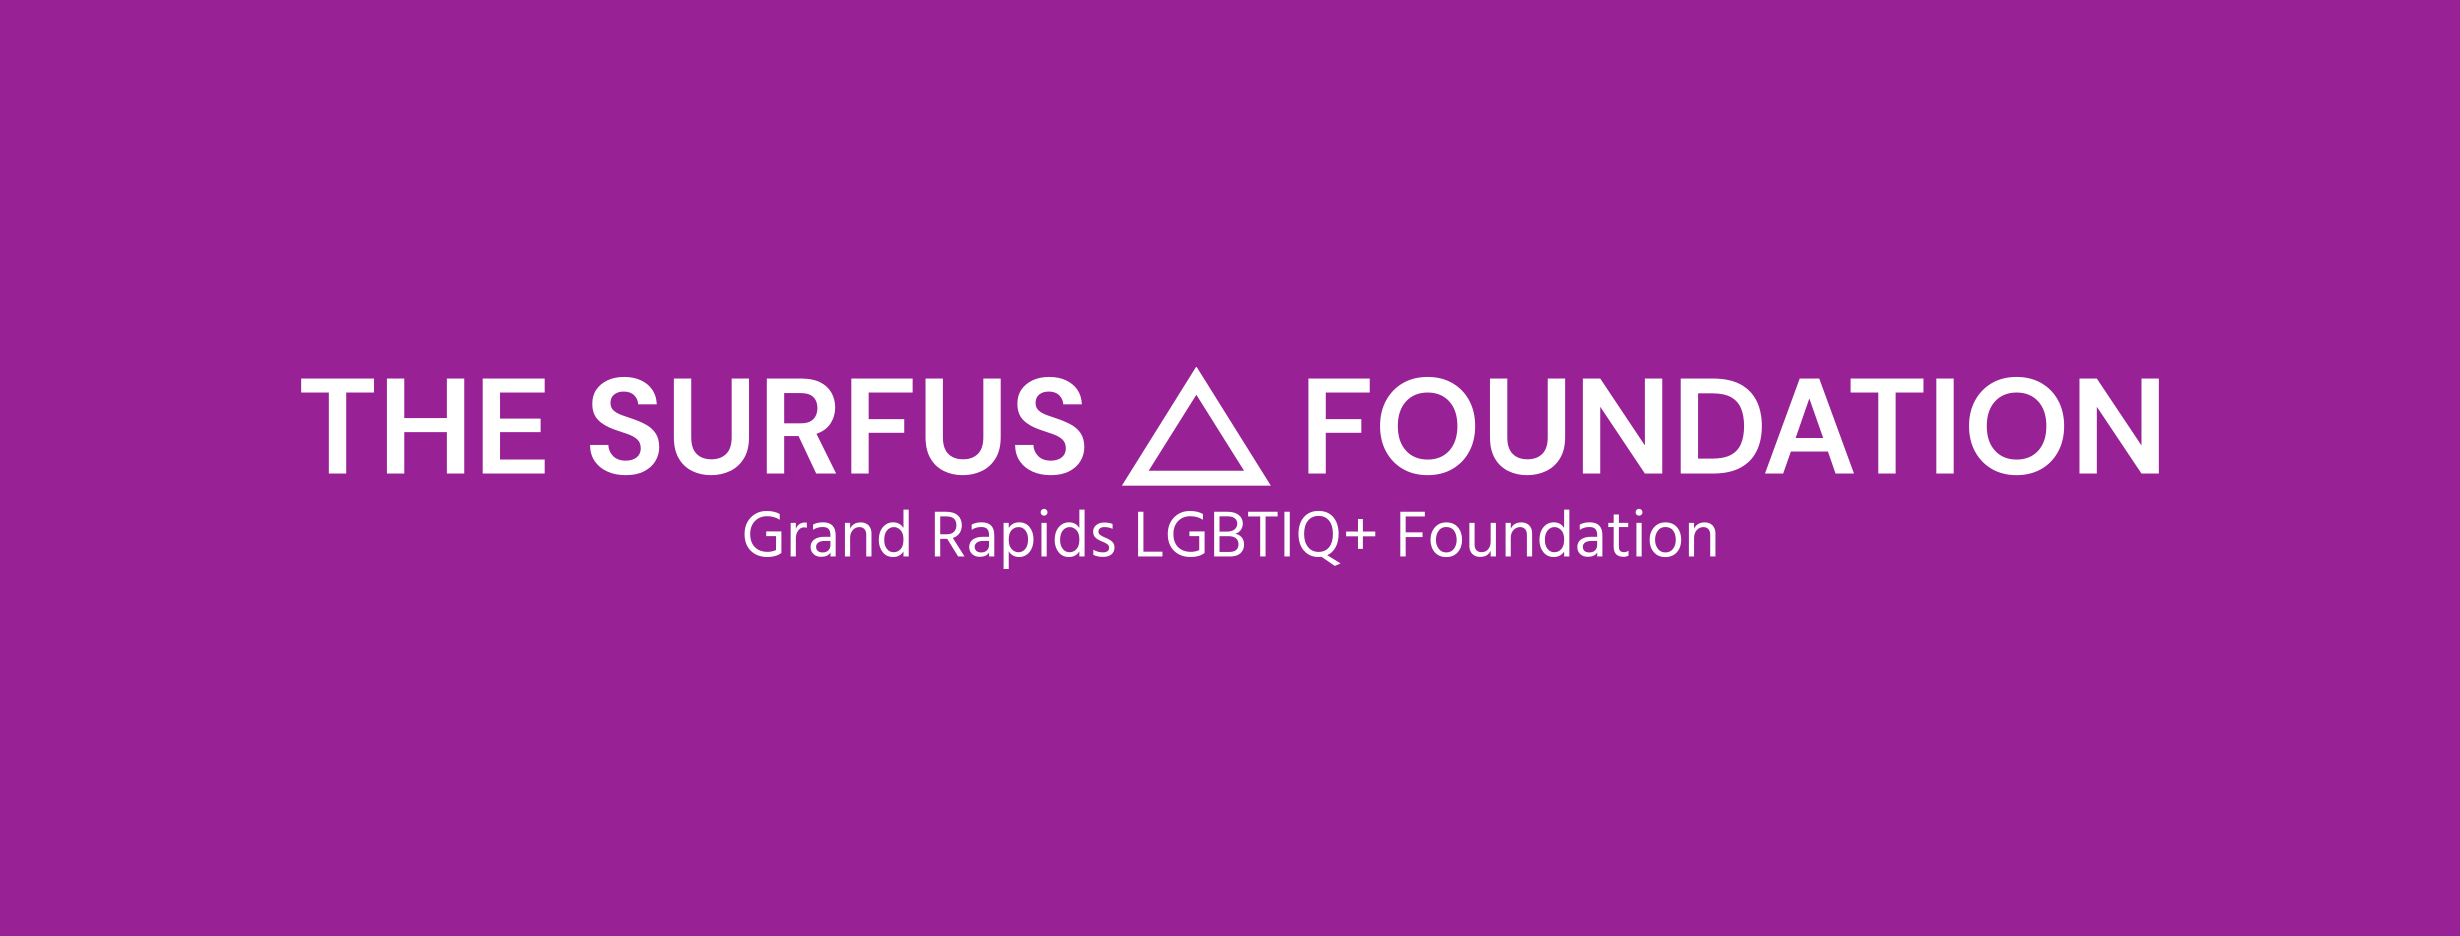 The Surfus Foundation